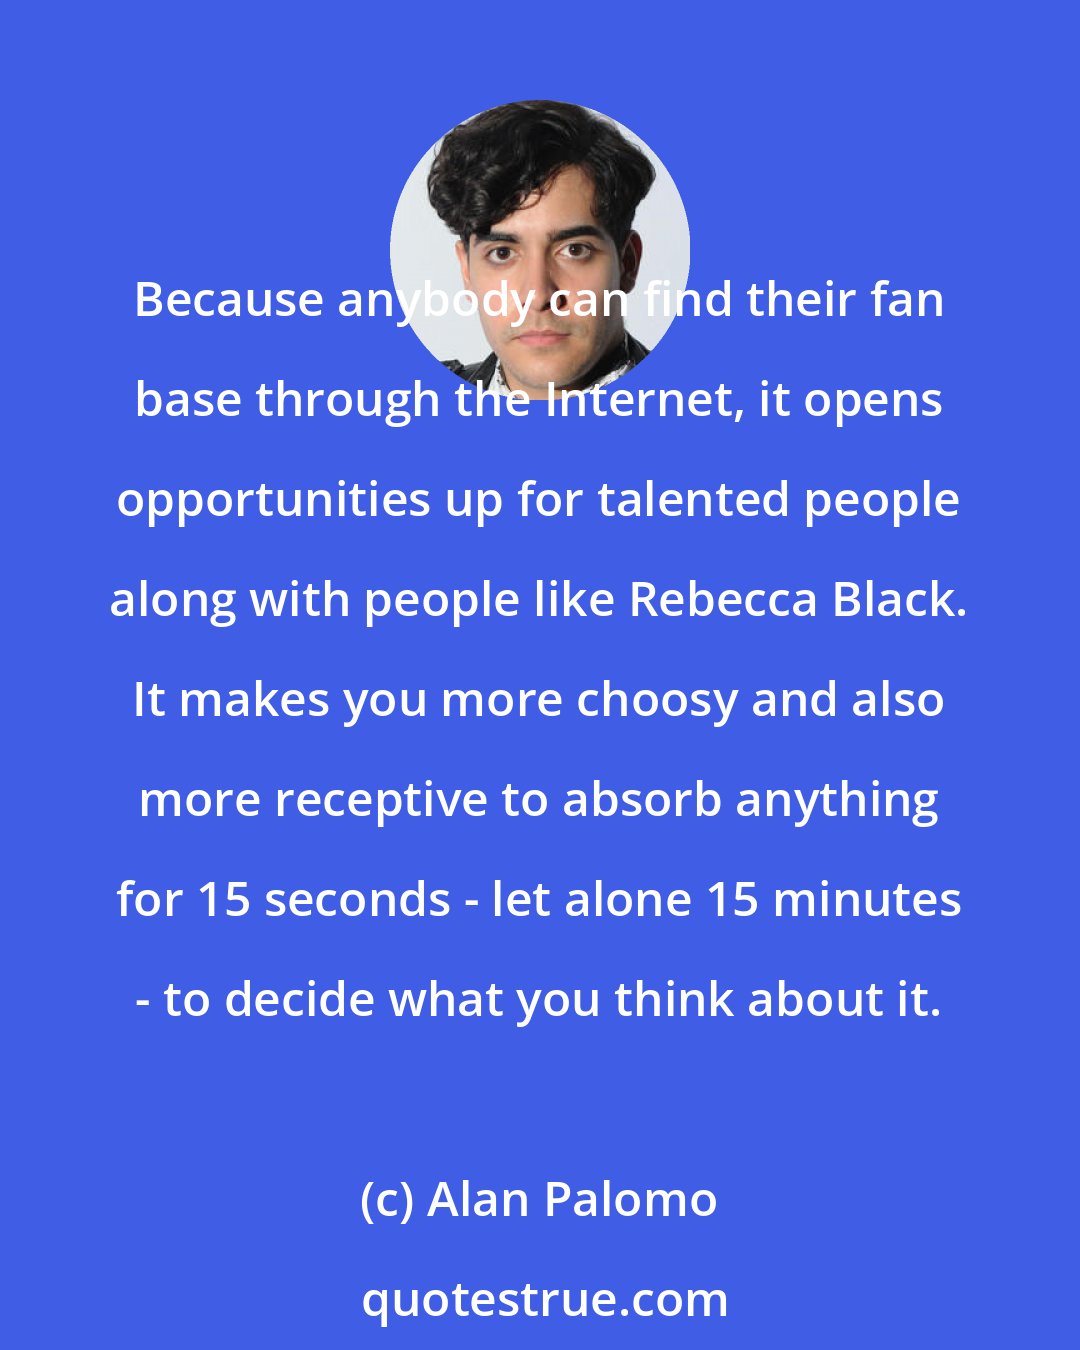 Alan Palomo: Because anybody can find their fan base through the Internet, it opens opportunities up for talented people along with people like Rebecca Black. It makes you more choosy and also more receptive to absorb anything for 15 seconds - let alone 15 minutes - to decide what you think about it.